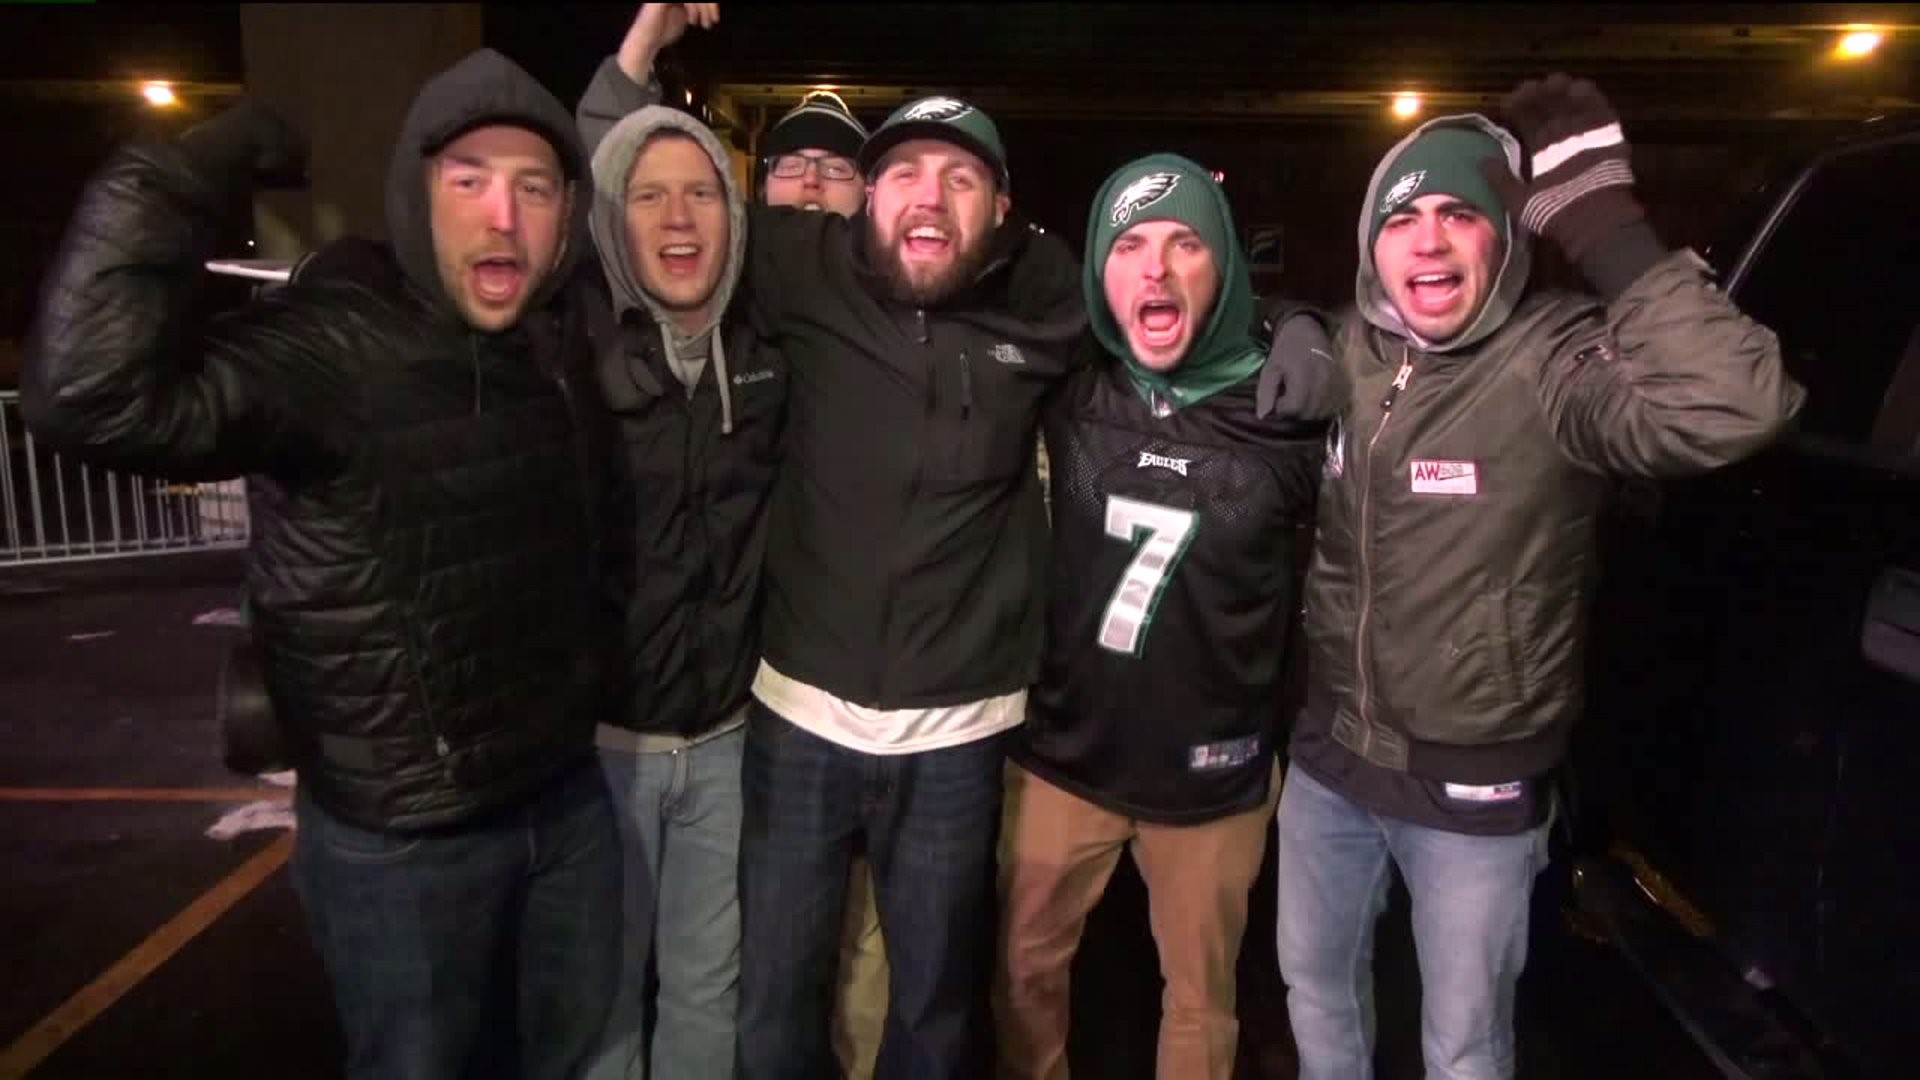 Local Fans Ring in Wing Bowl 26